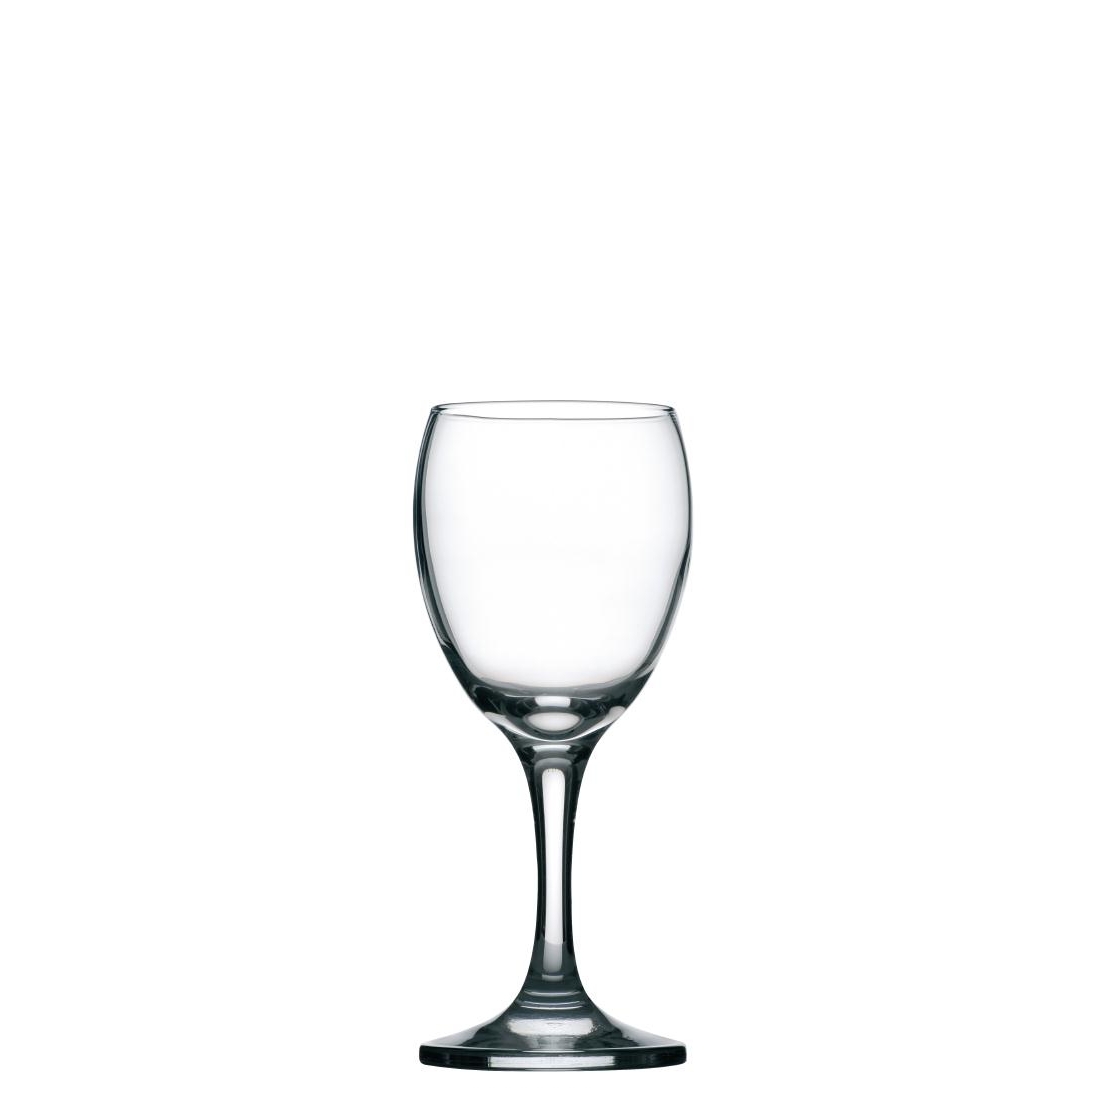 Utopia Imperial White Wine Glasses 200ml CE Marked at 125ml